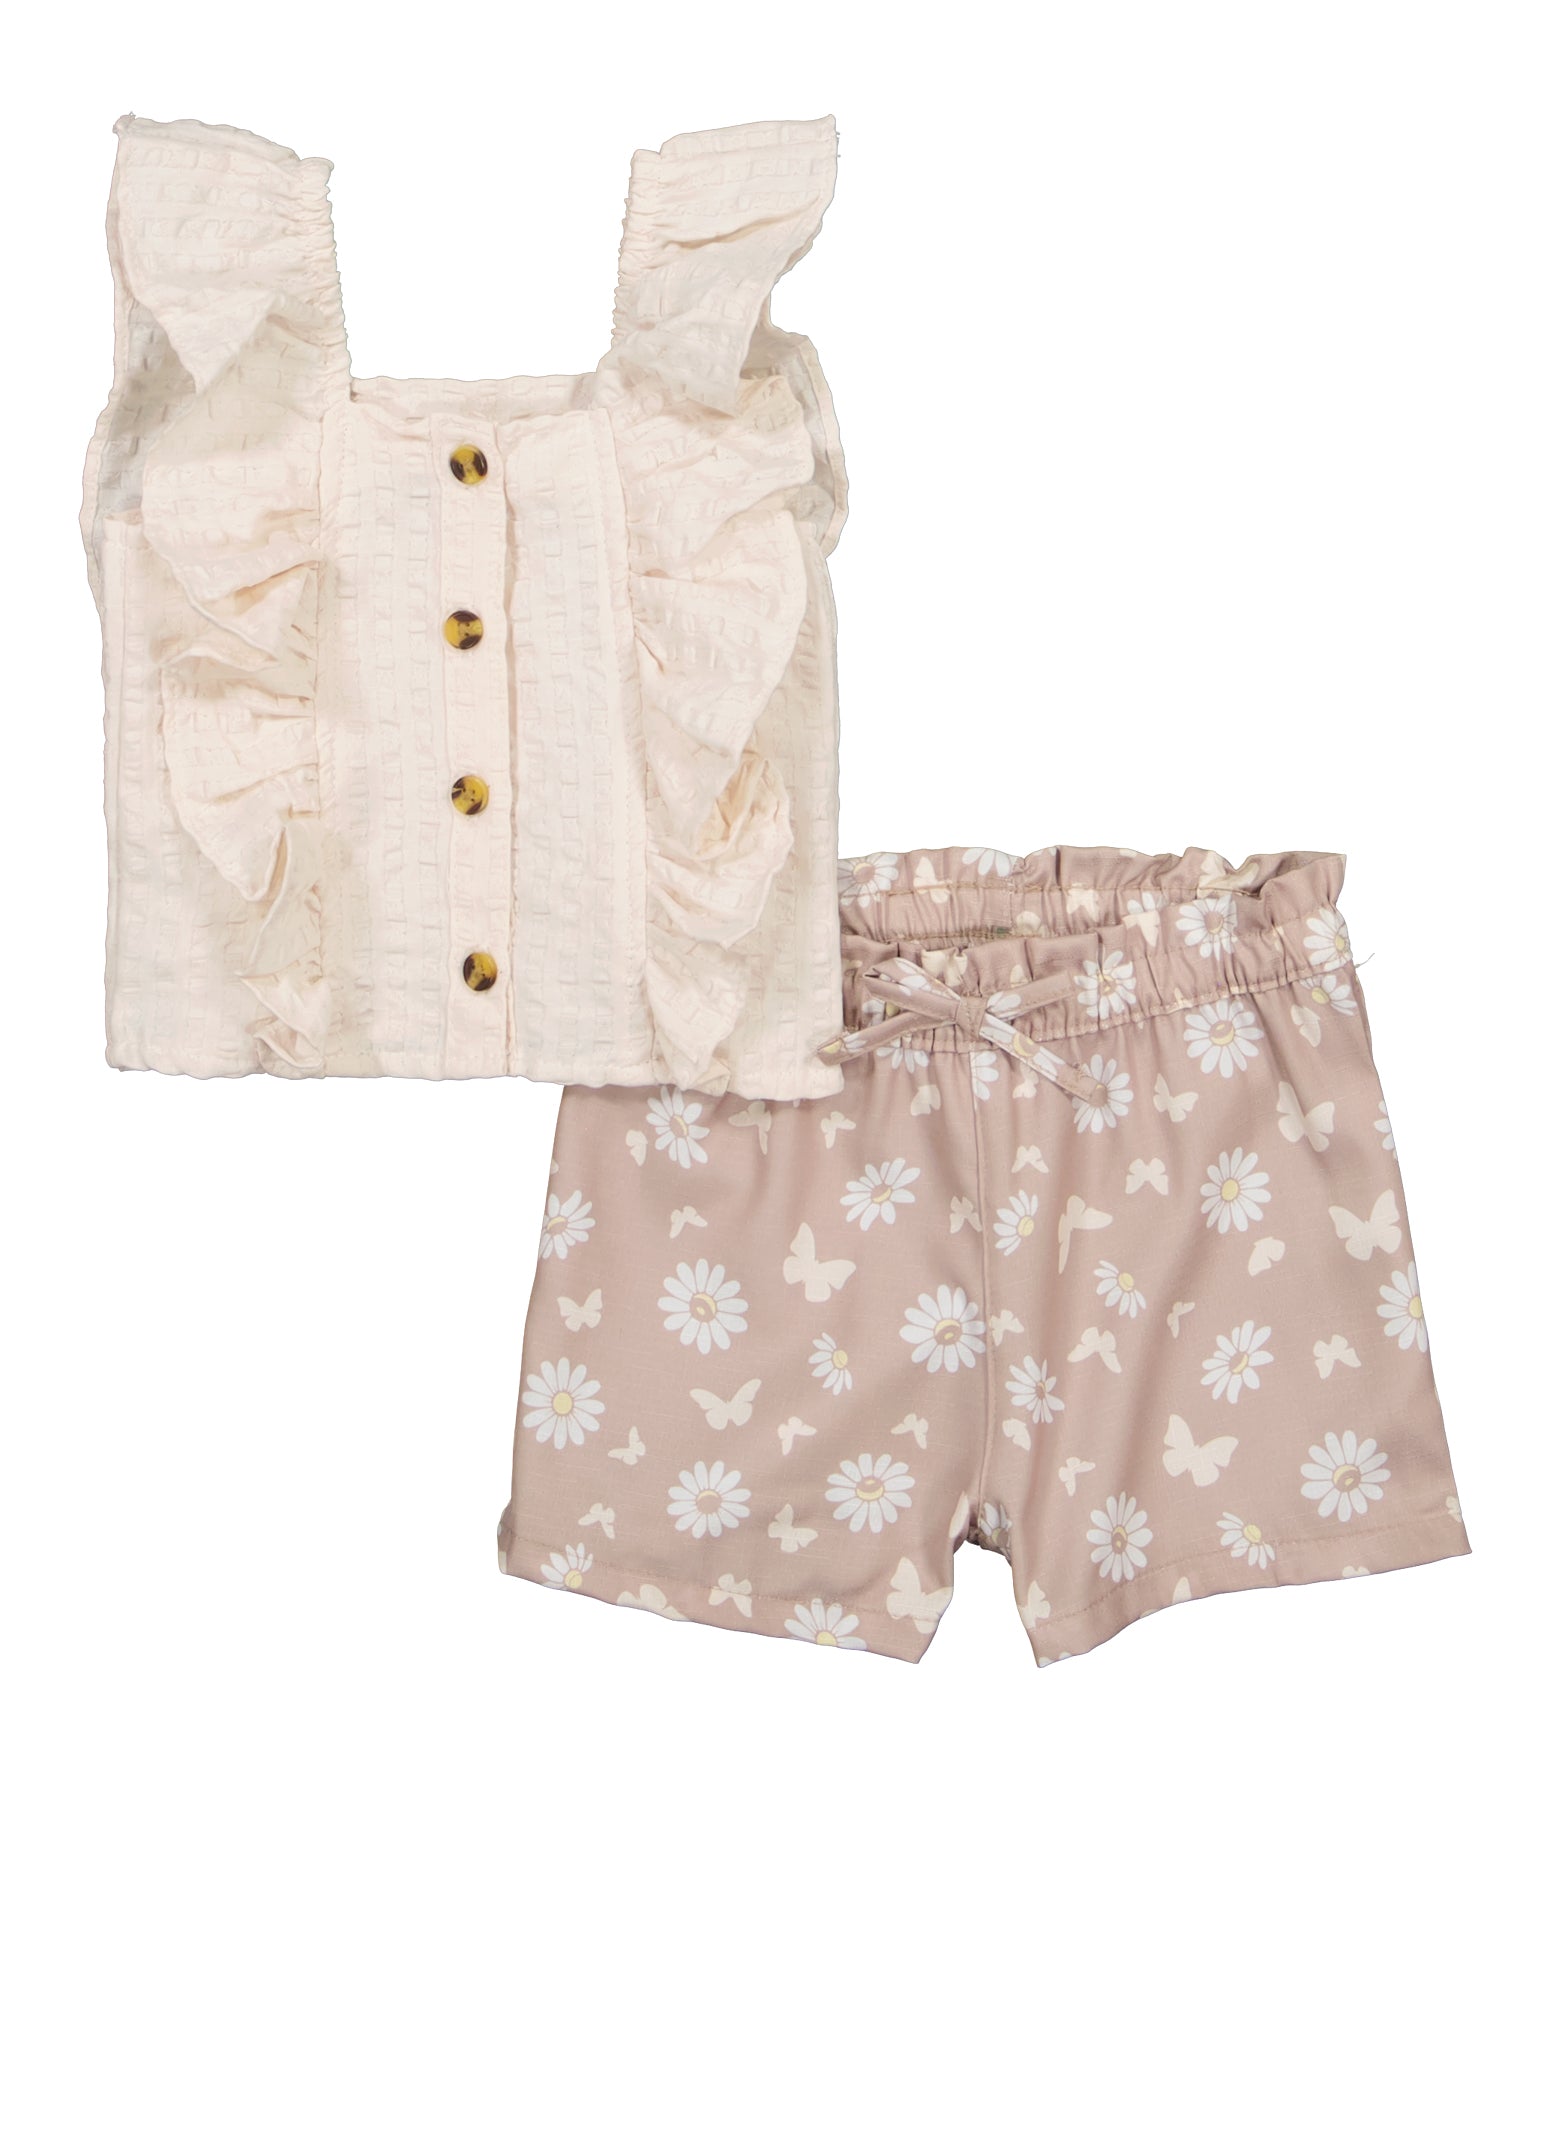 Toddler Girls Linen Button Front Tank Top and Floral Print Shorts, Beige, Size 3T